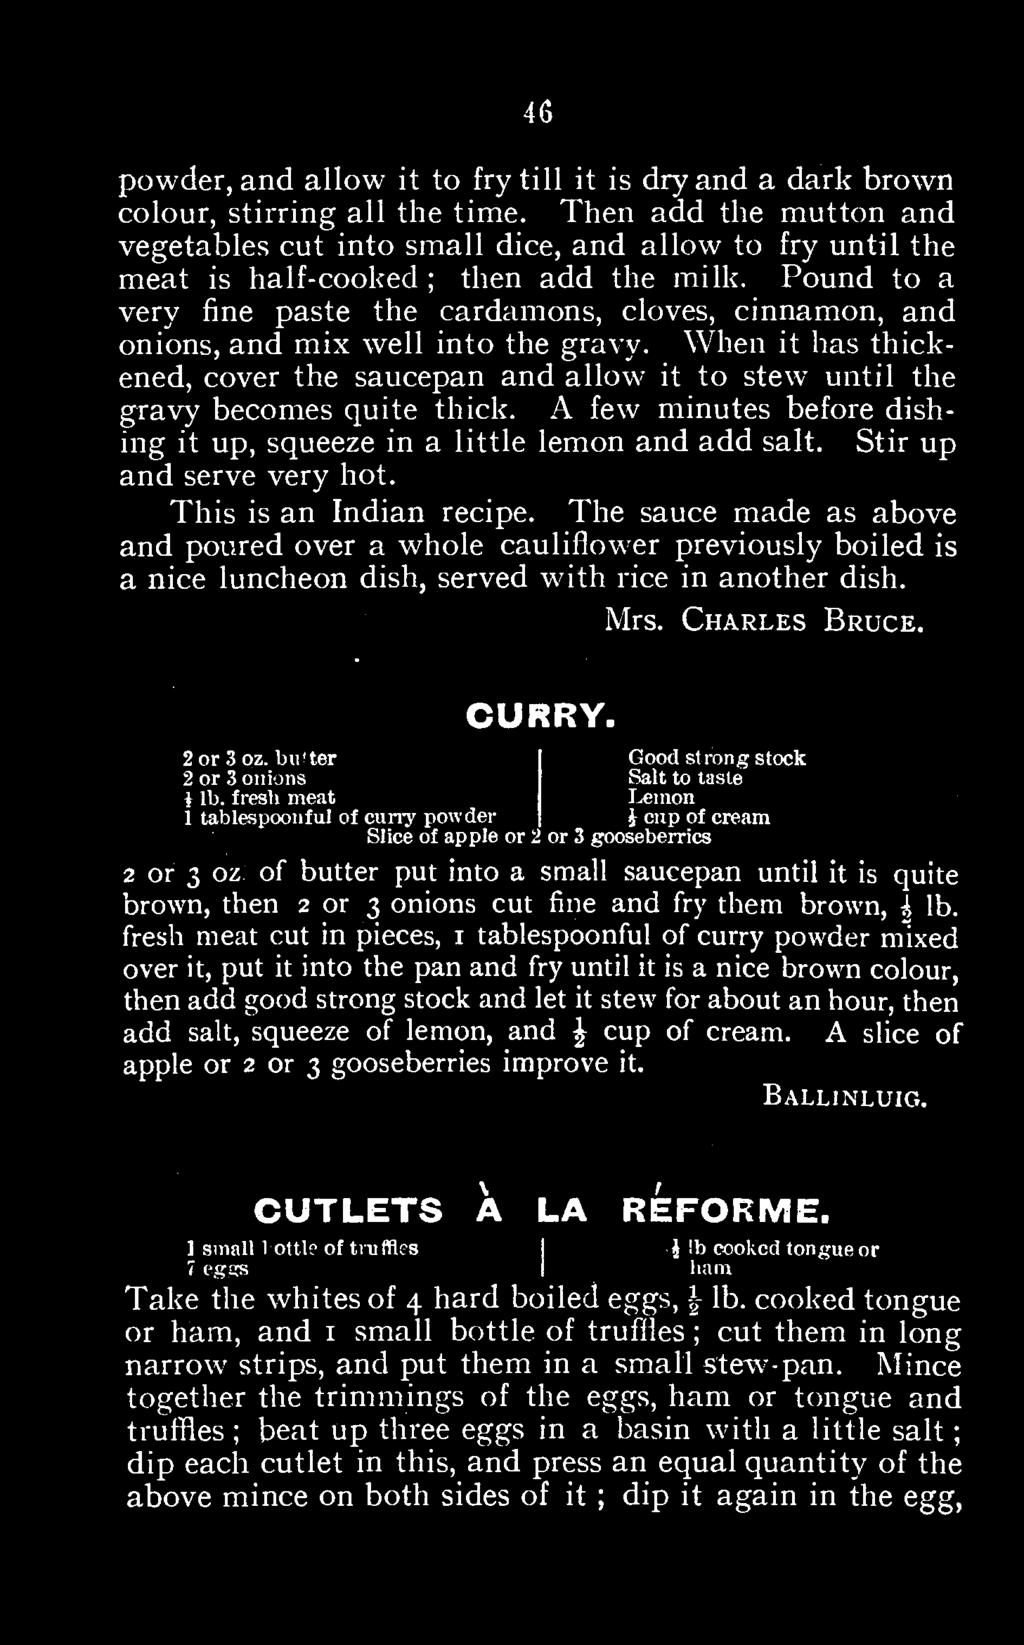 The sauce made as above and poured over a whole cauliflower previously boiled is a nice luncheon dish, served with rice in another dish. Mrs. Charles Bruce. CURRY. 2 or 3.3 onions oz. bv.